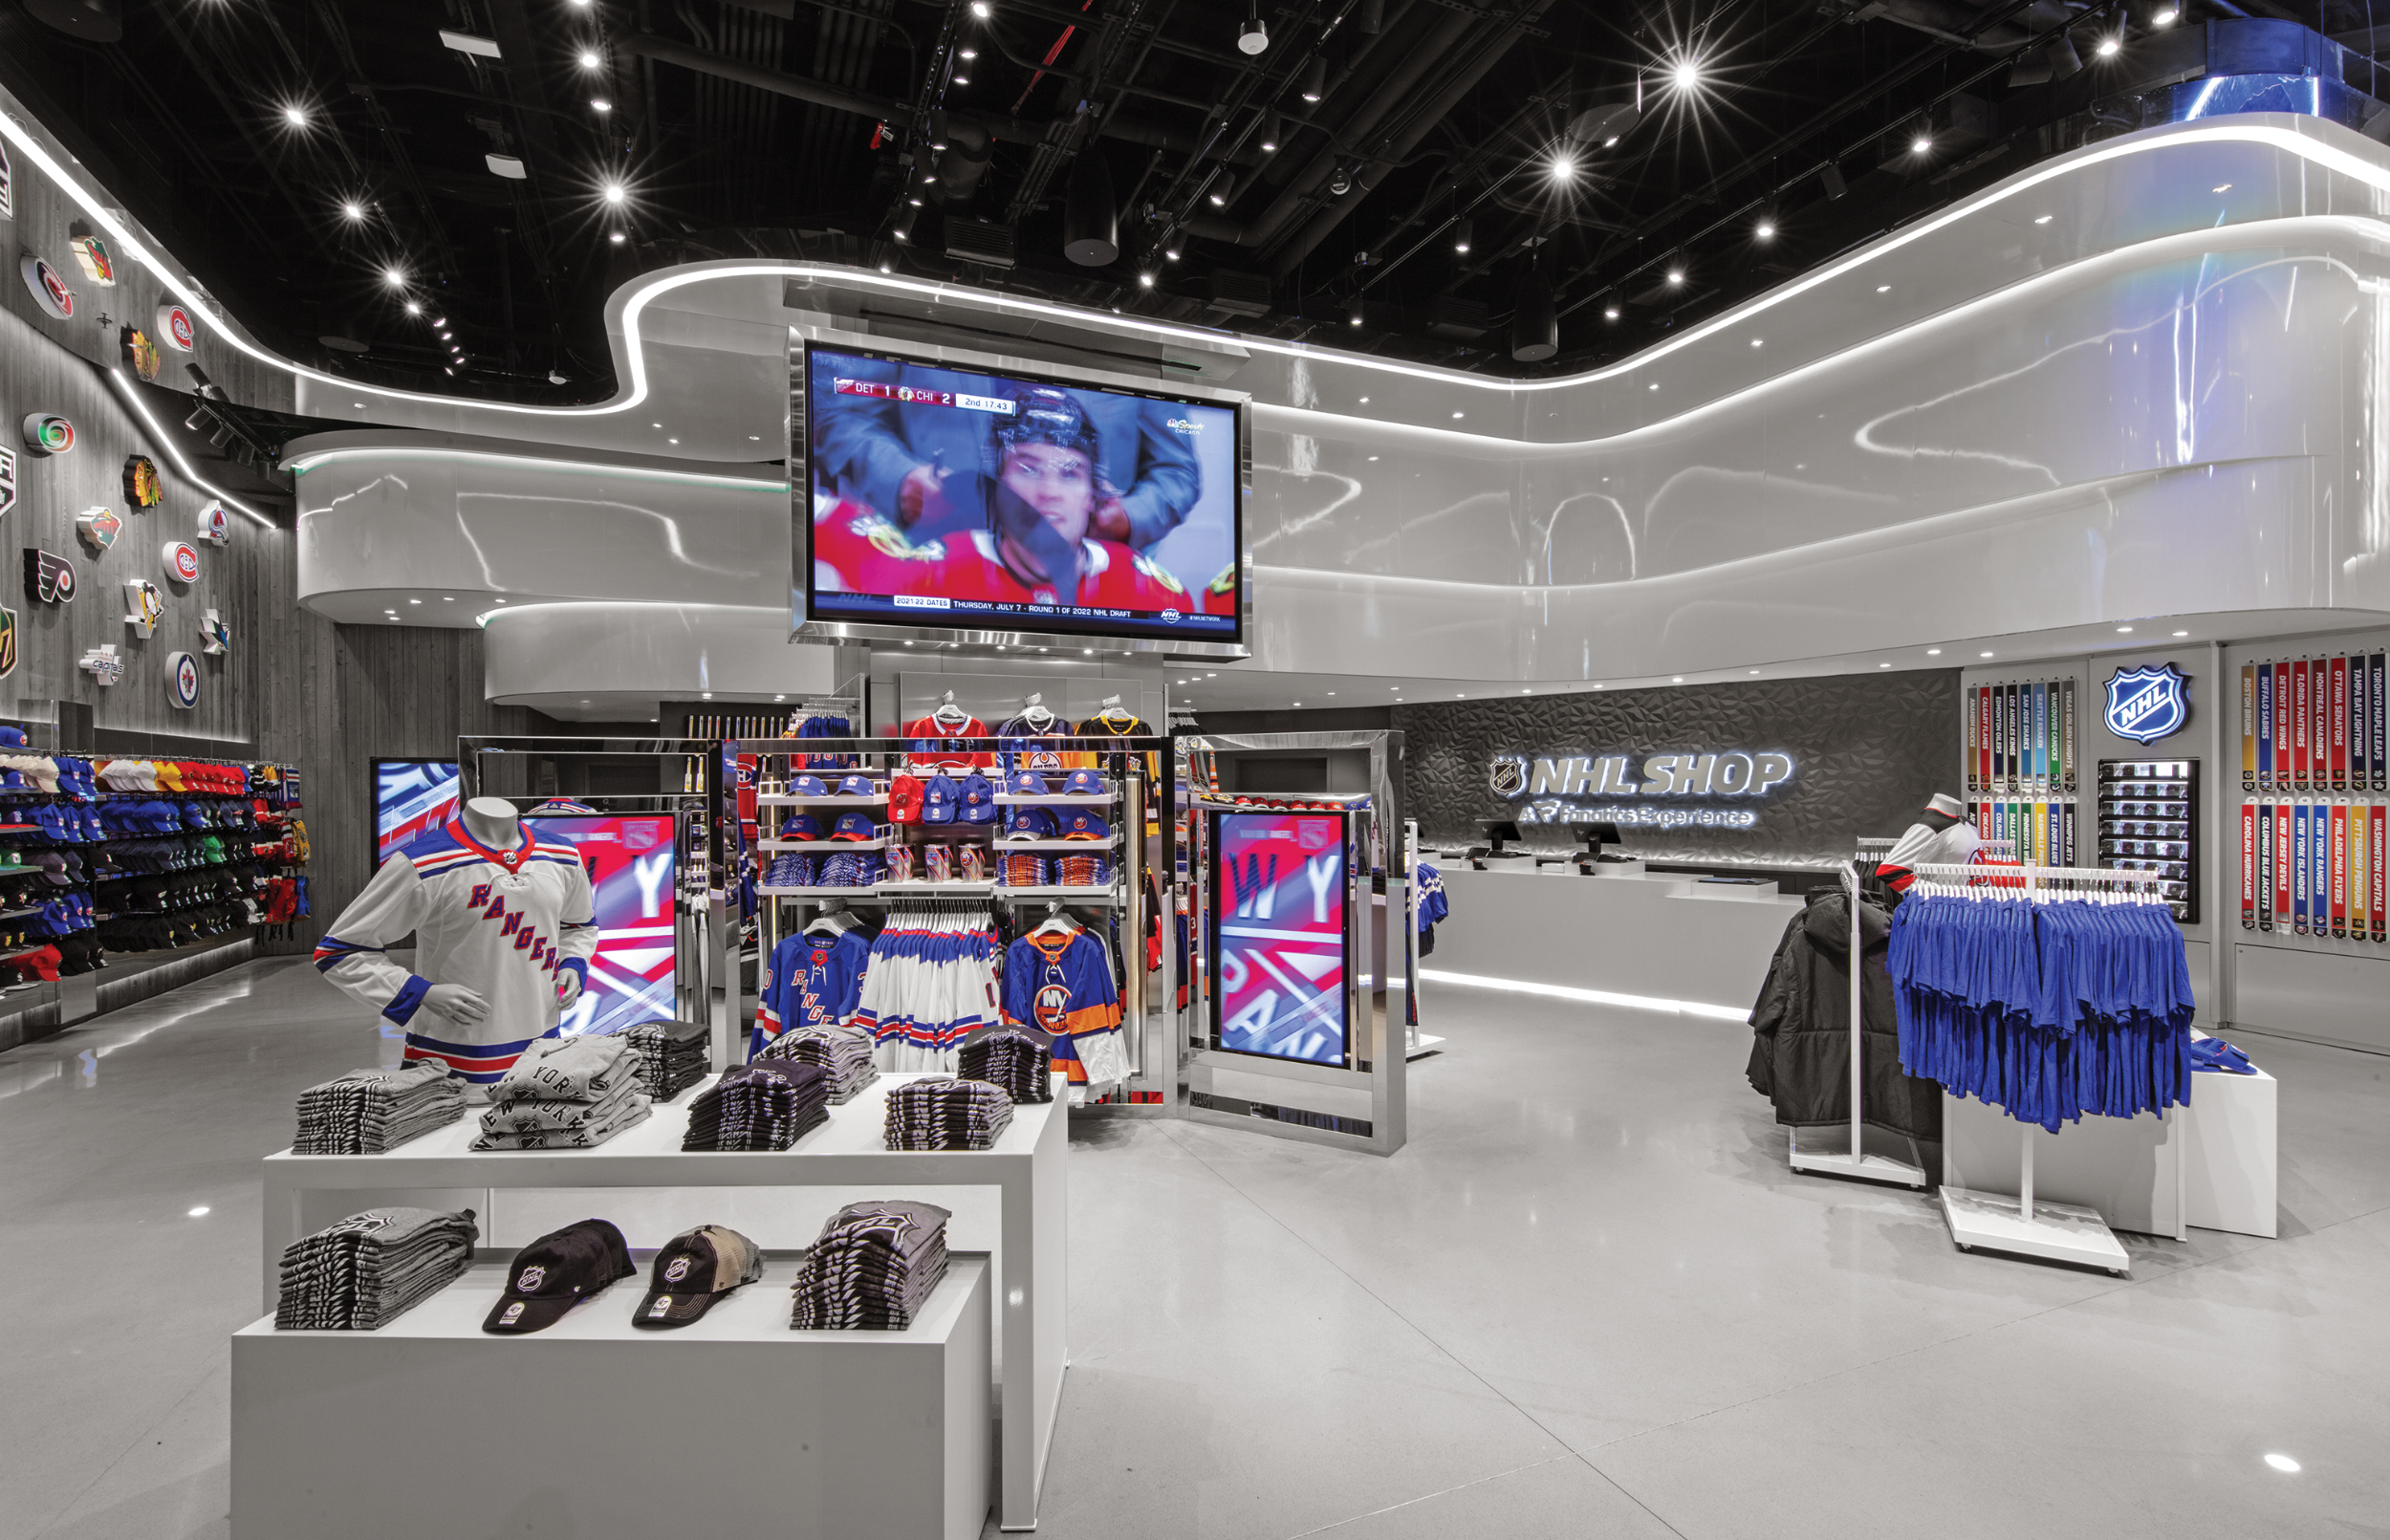 The National Hockey League (NHL) recently debuted its expansive 9000-square-foot store featuring a curvilinear design aesthetic.